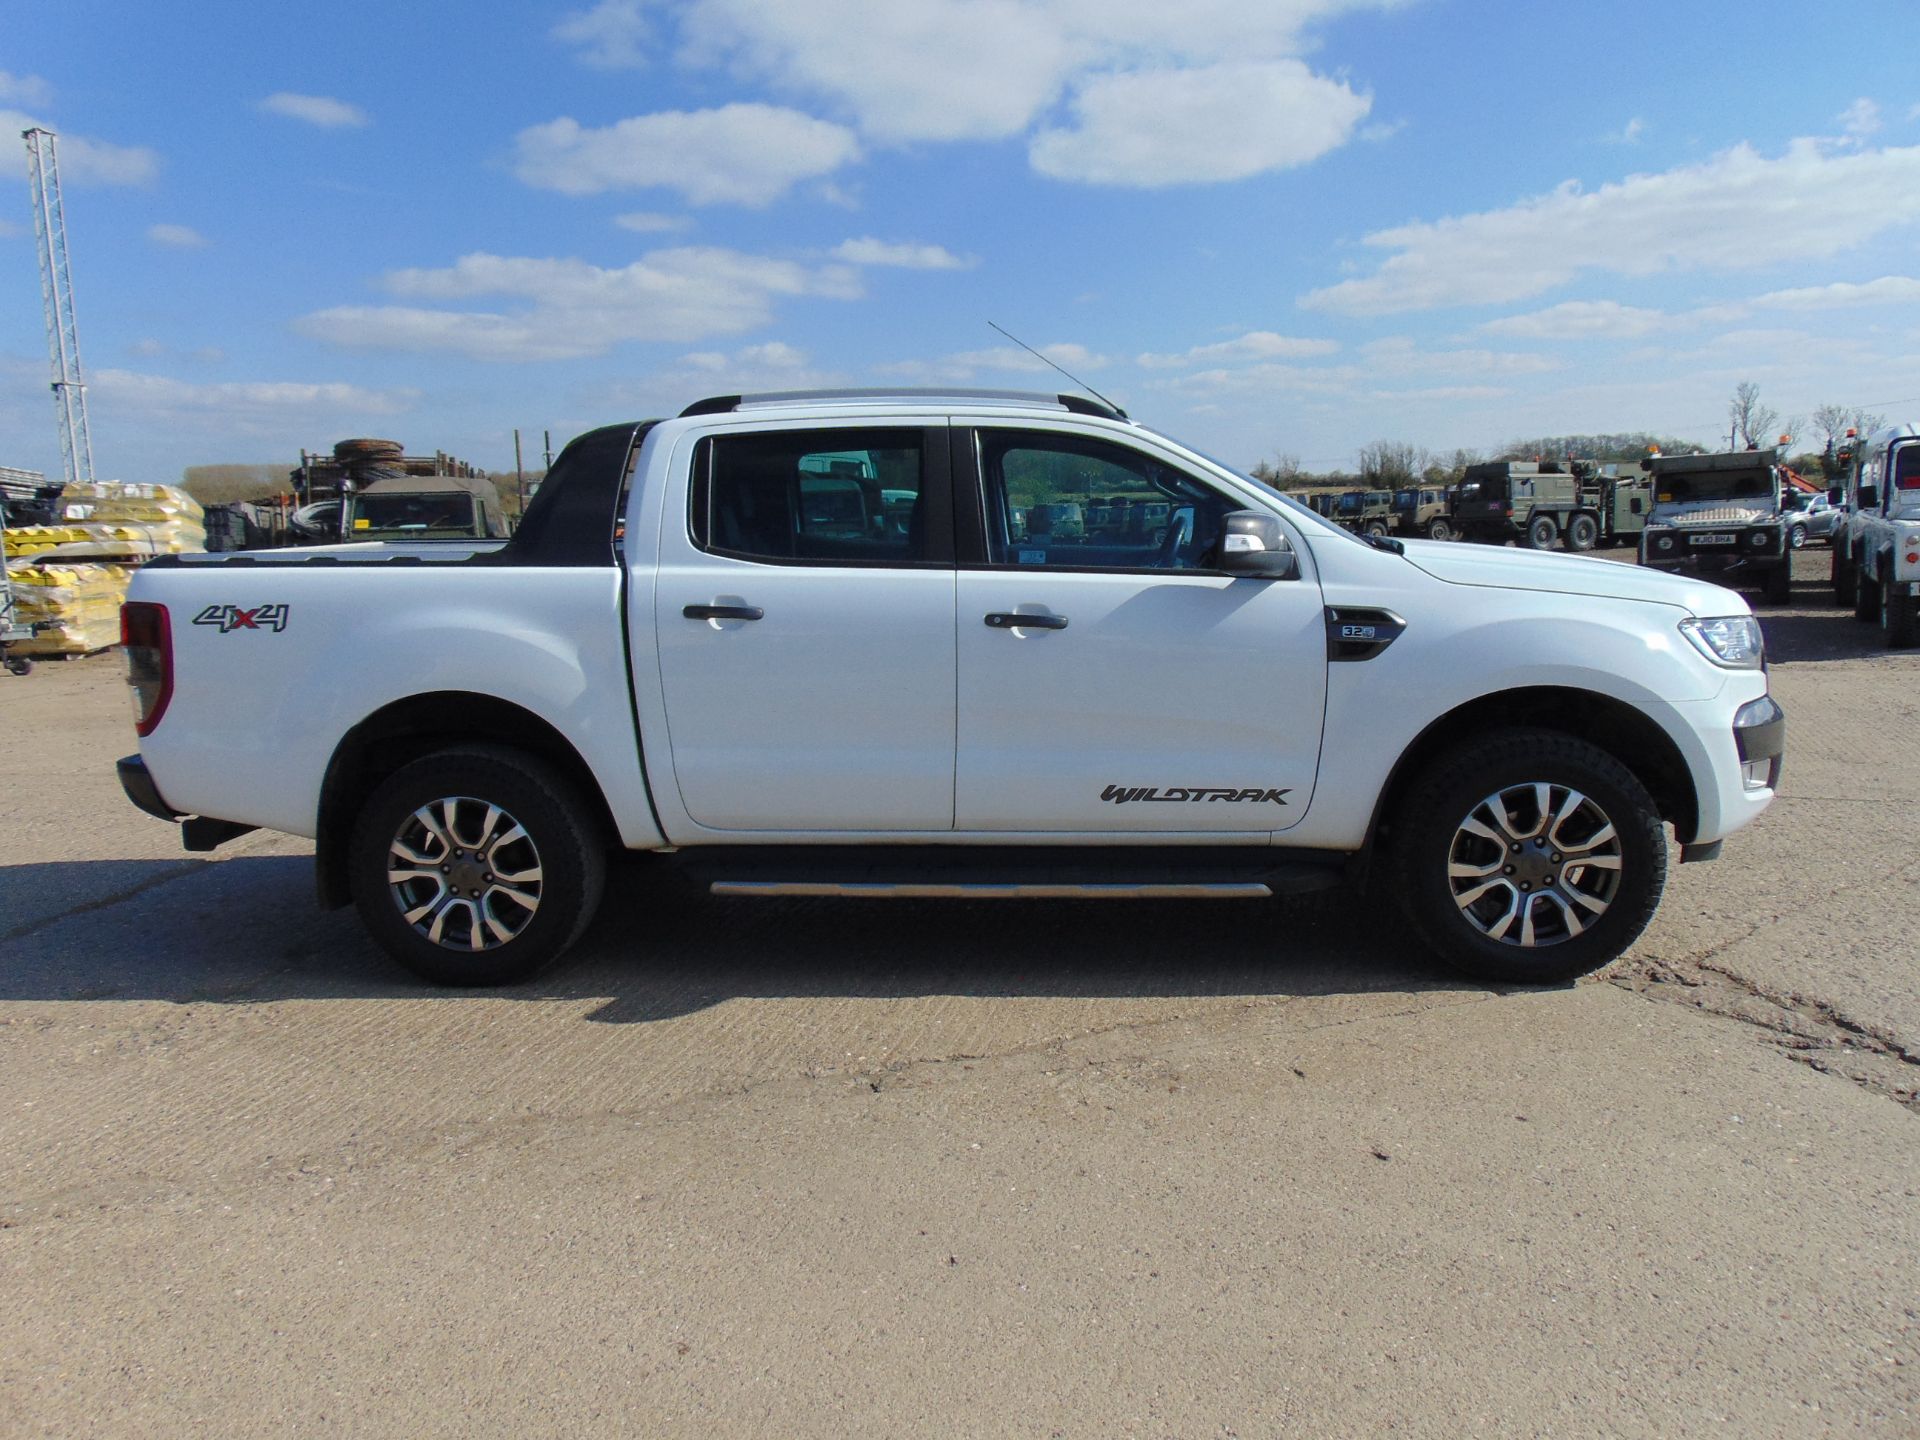 2016 Ford Ranger 3.2 Wildtrak 4x4 Double Cab Pickup in Frozen white - Image 5 of 36